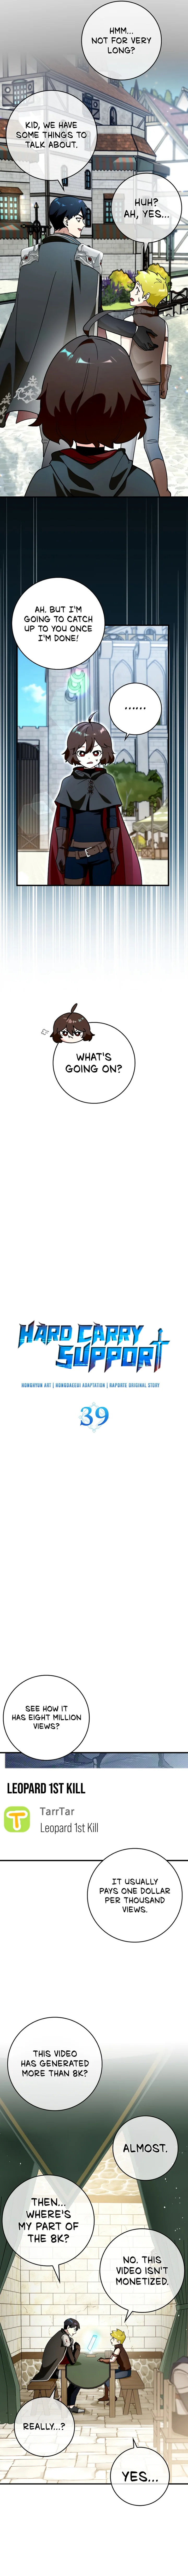 Hard Carry Support Chapter 39 - Page 2